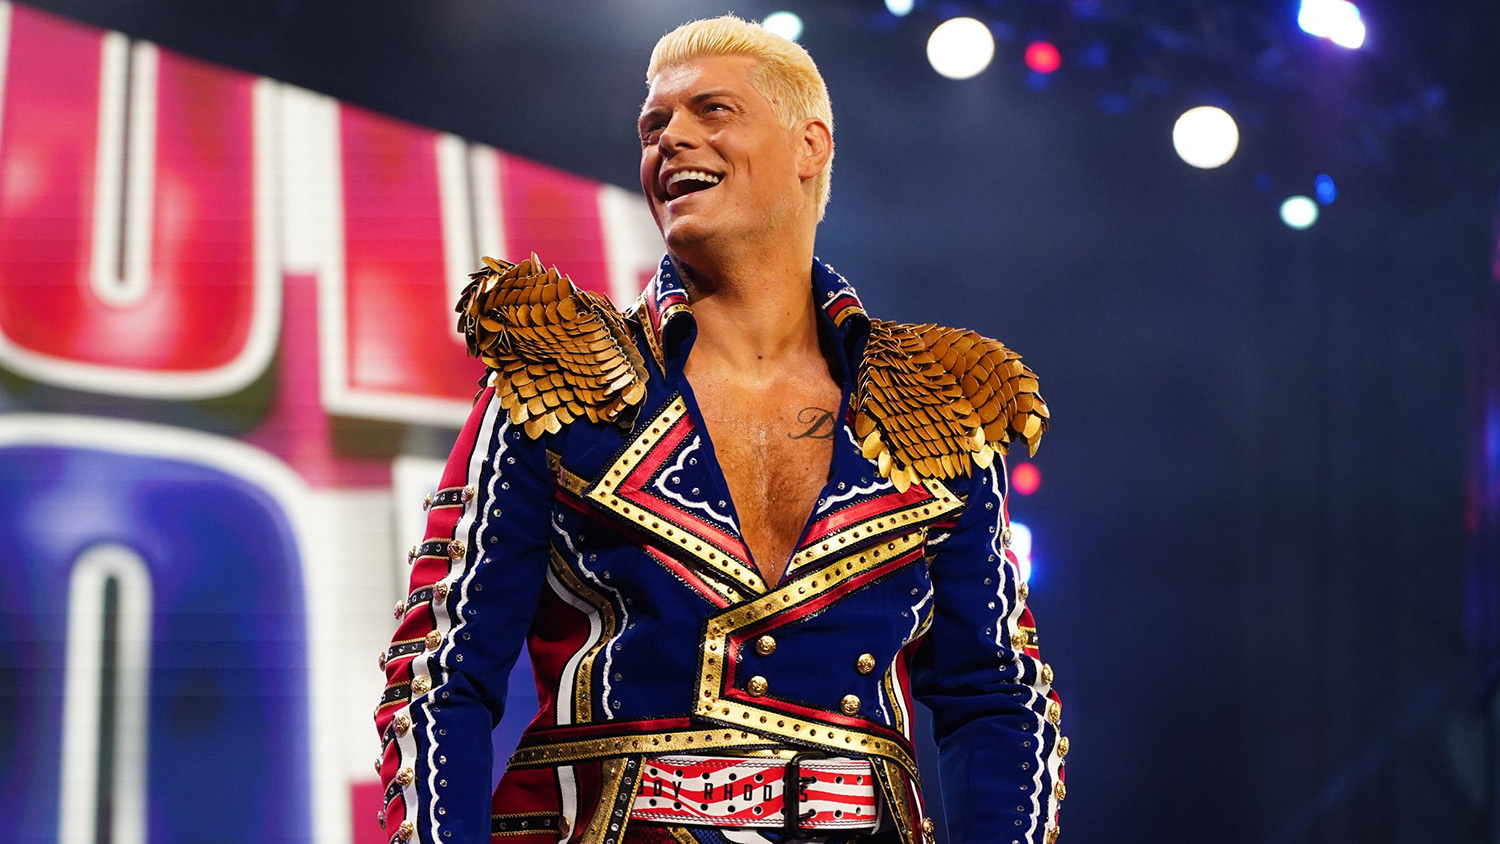 Cody Rhodes Debuts At WWE Wrestlemania After Leaving AEW